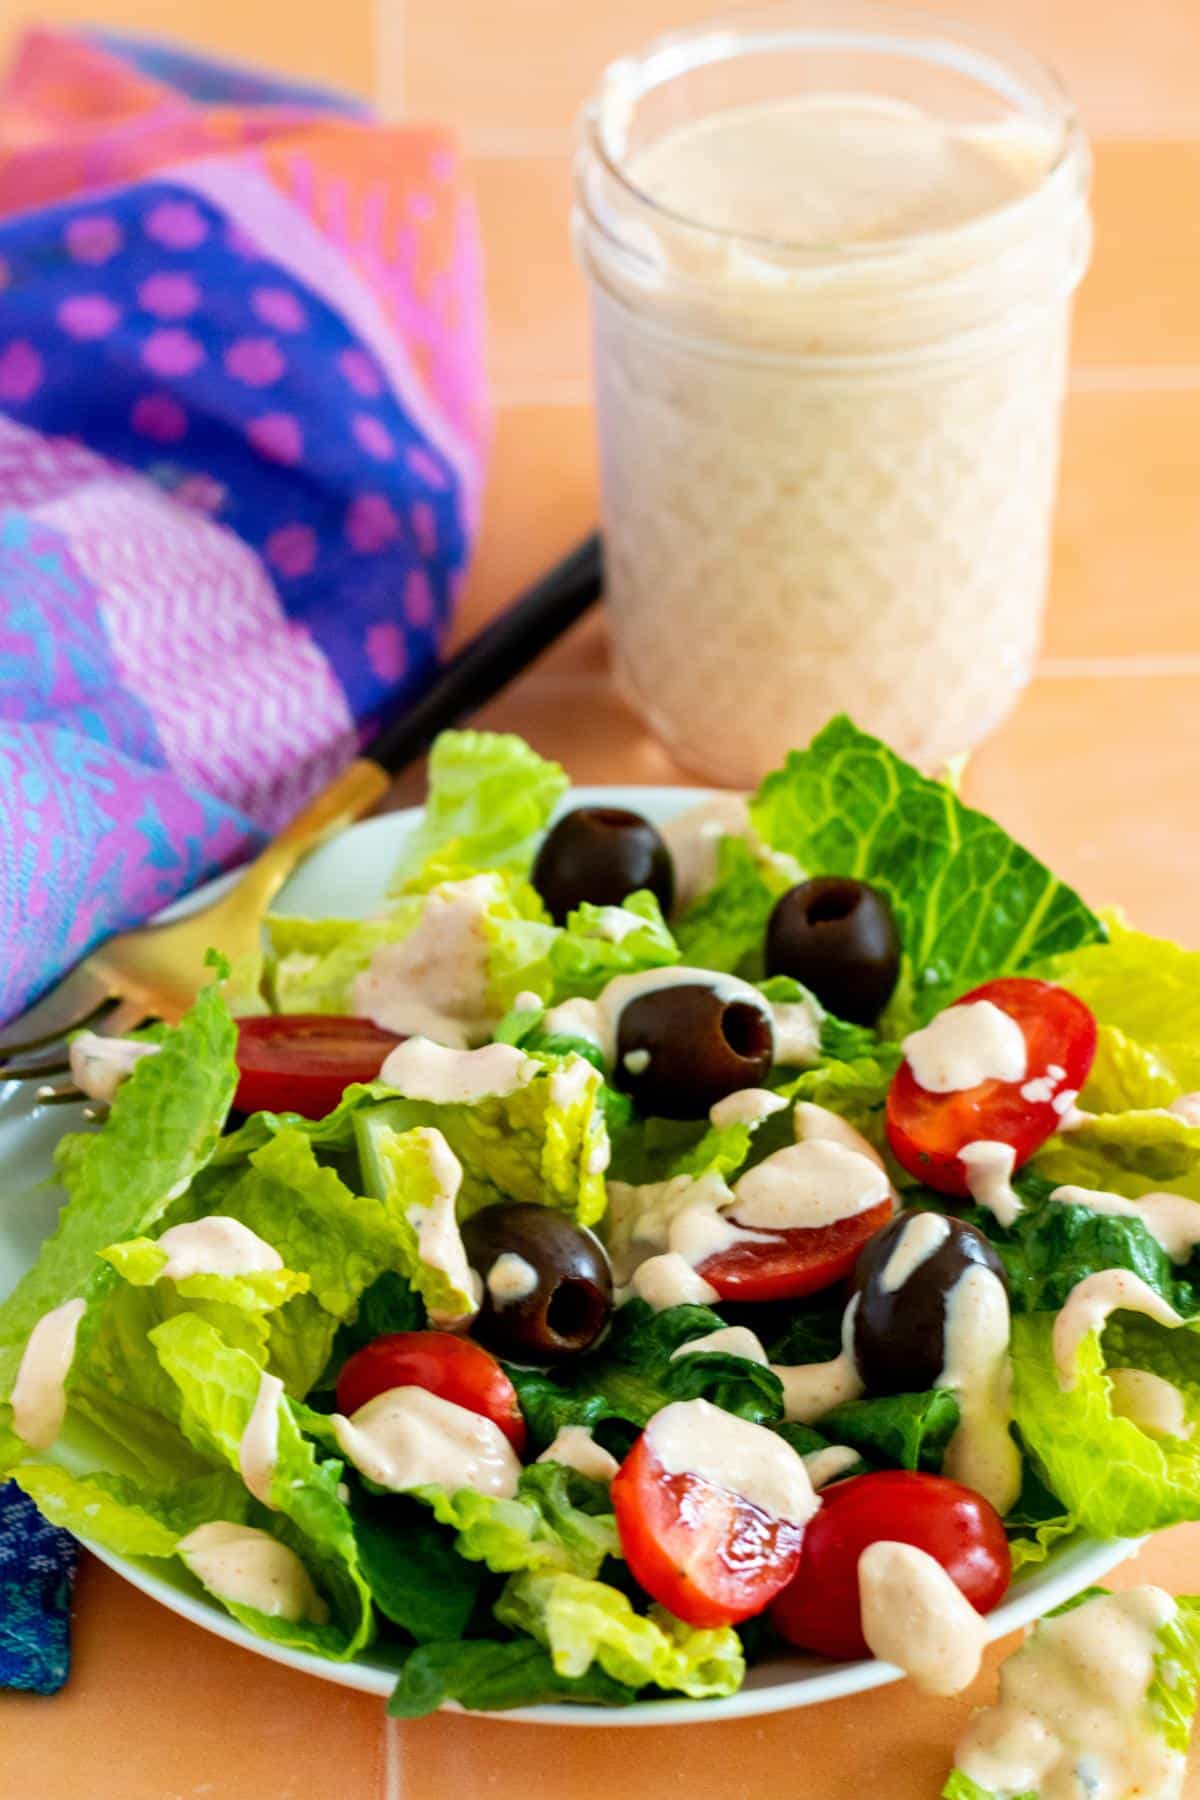 Plate of salad drizzled with dressing and jar of dressing behind it.